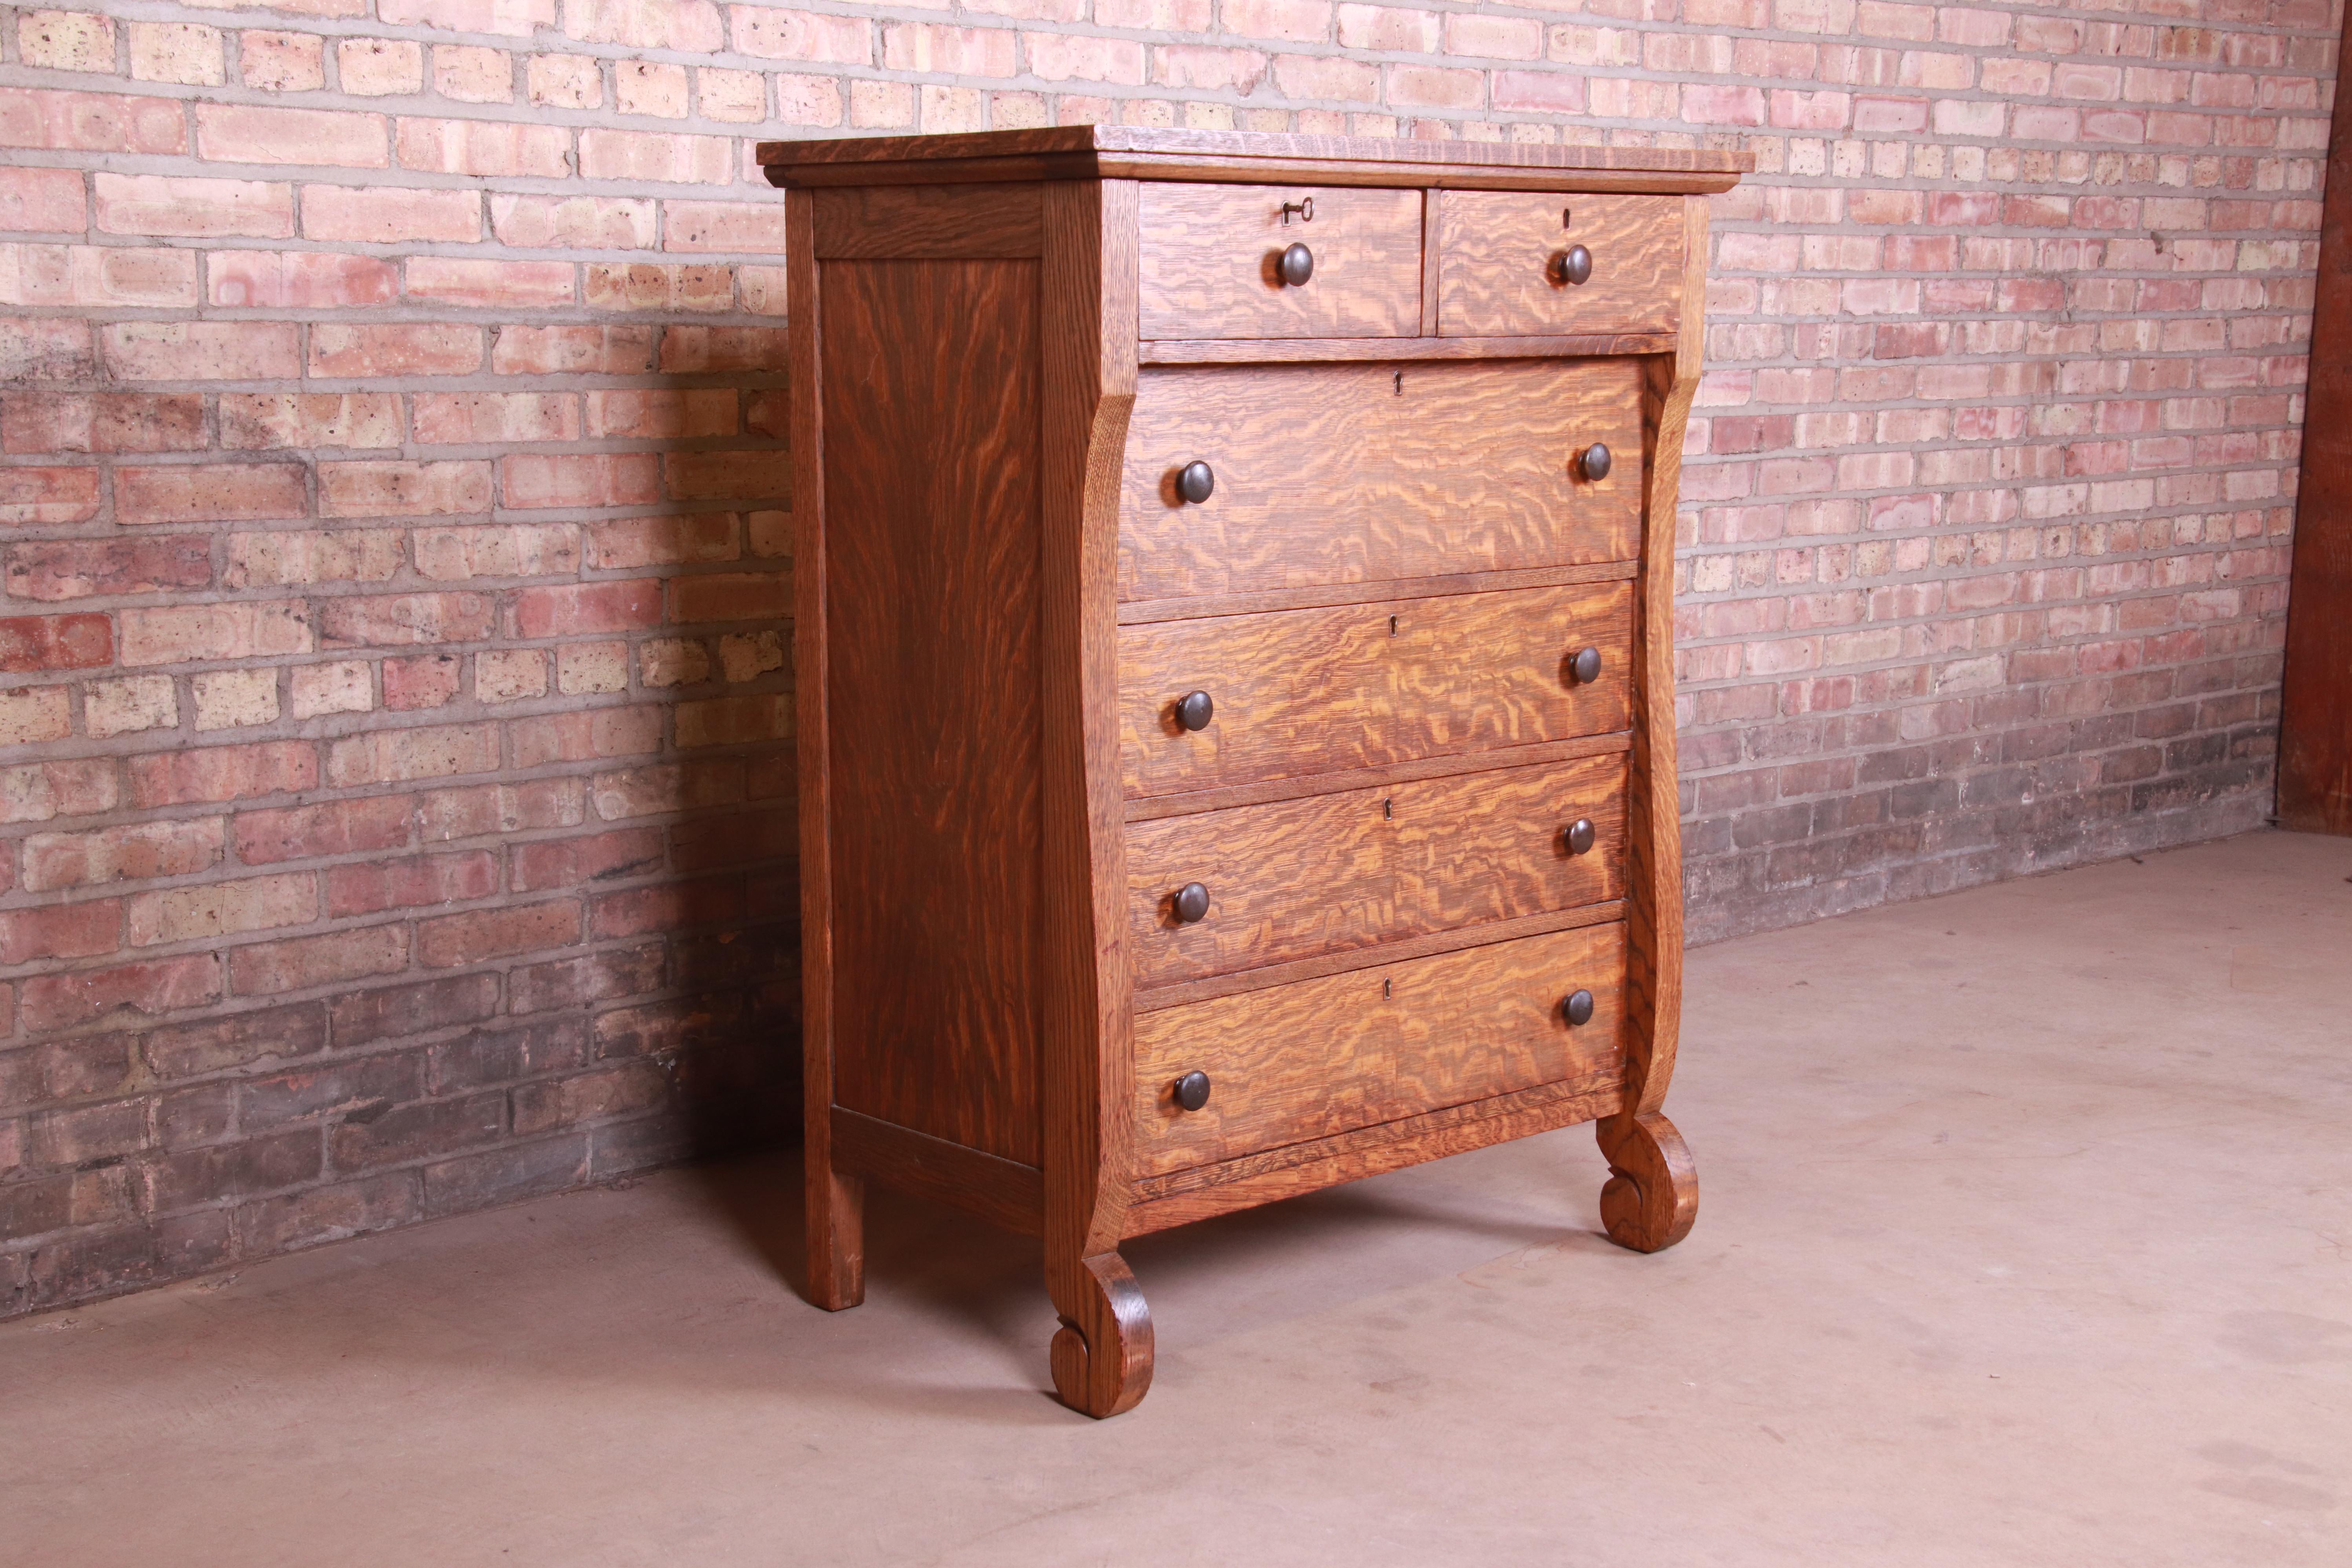 A gorgeous antique American Empire quarter sawn oak highboy dresser or chest of drawers,

USA, circa 1900

Measures: 34.38